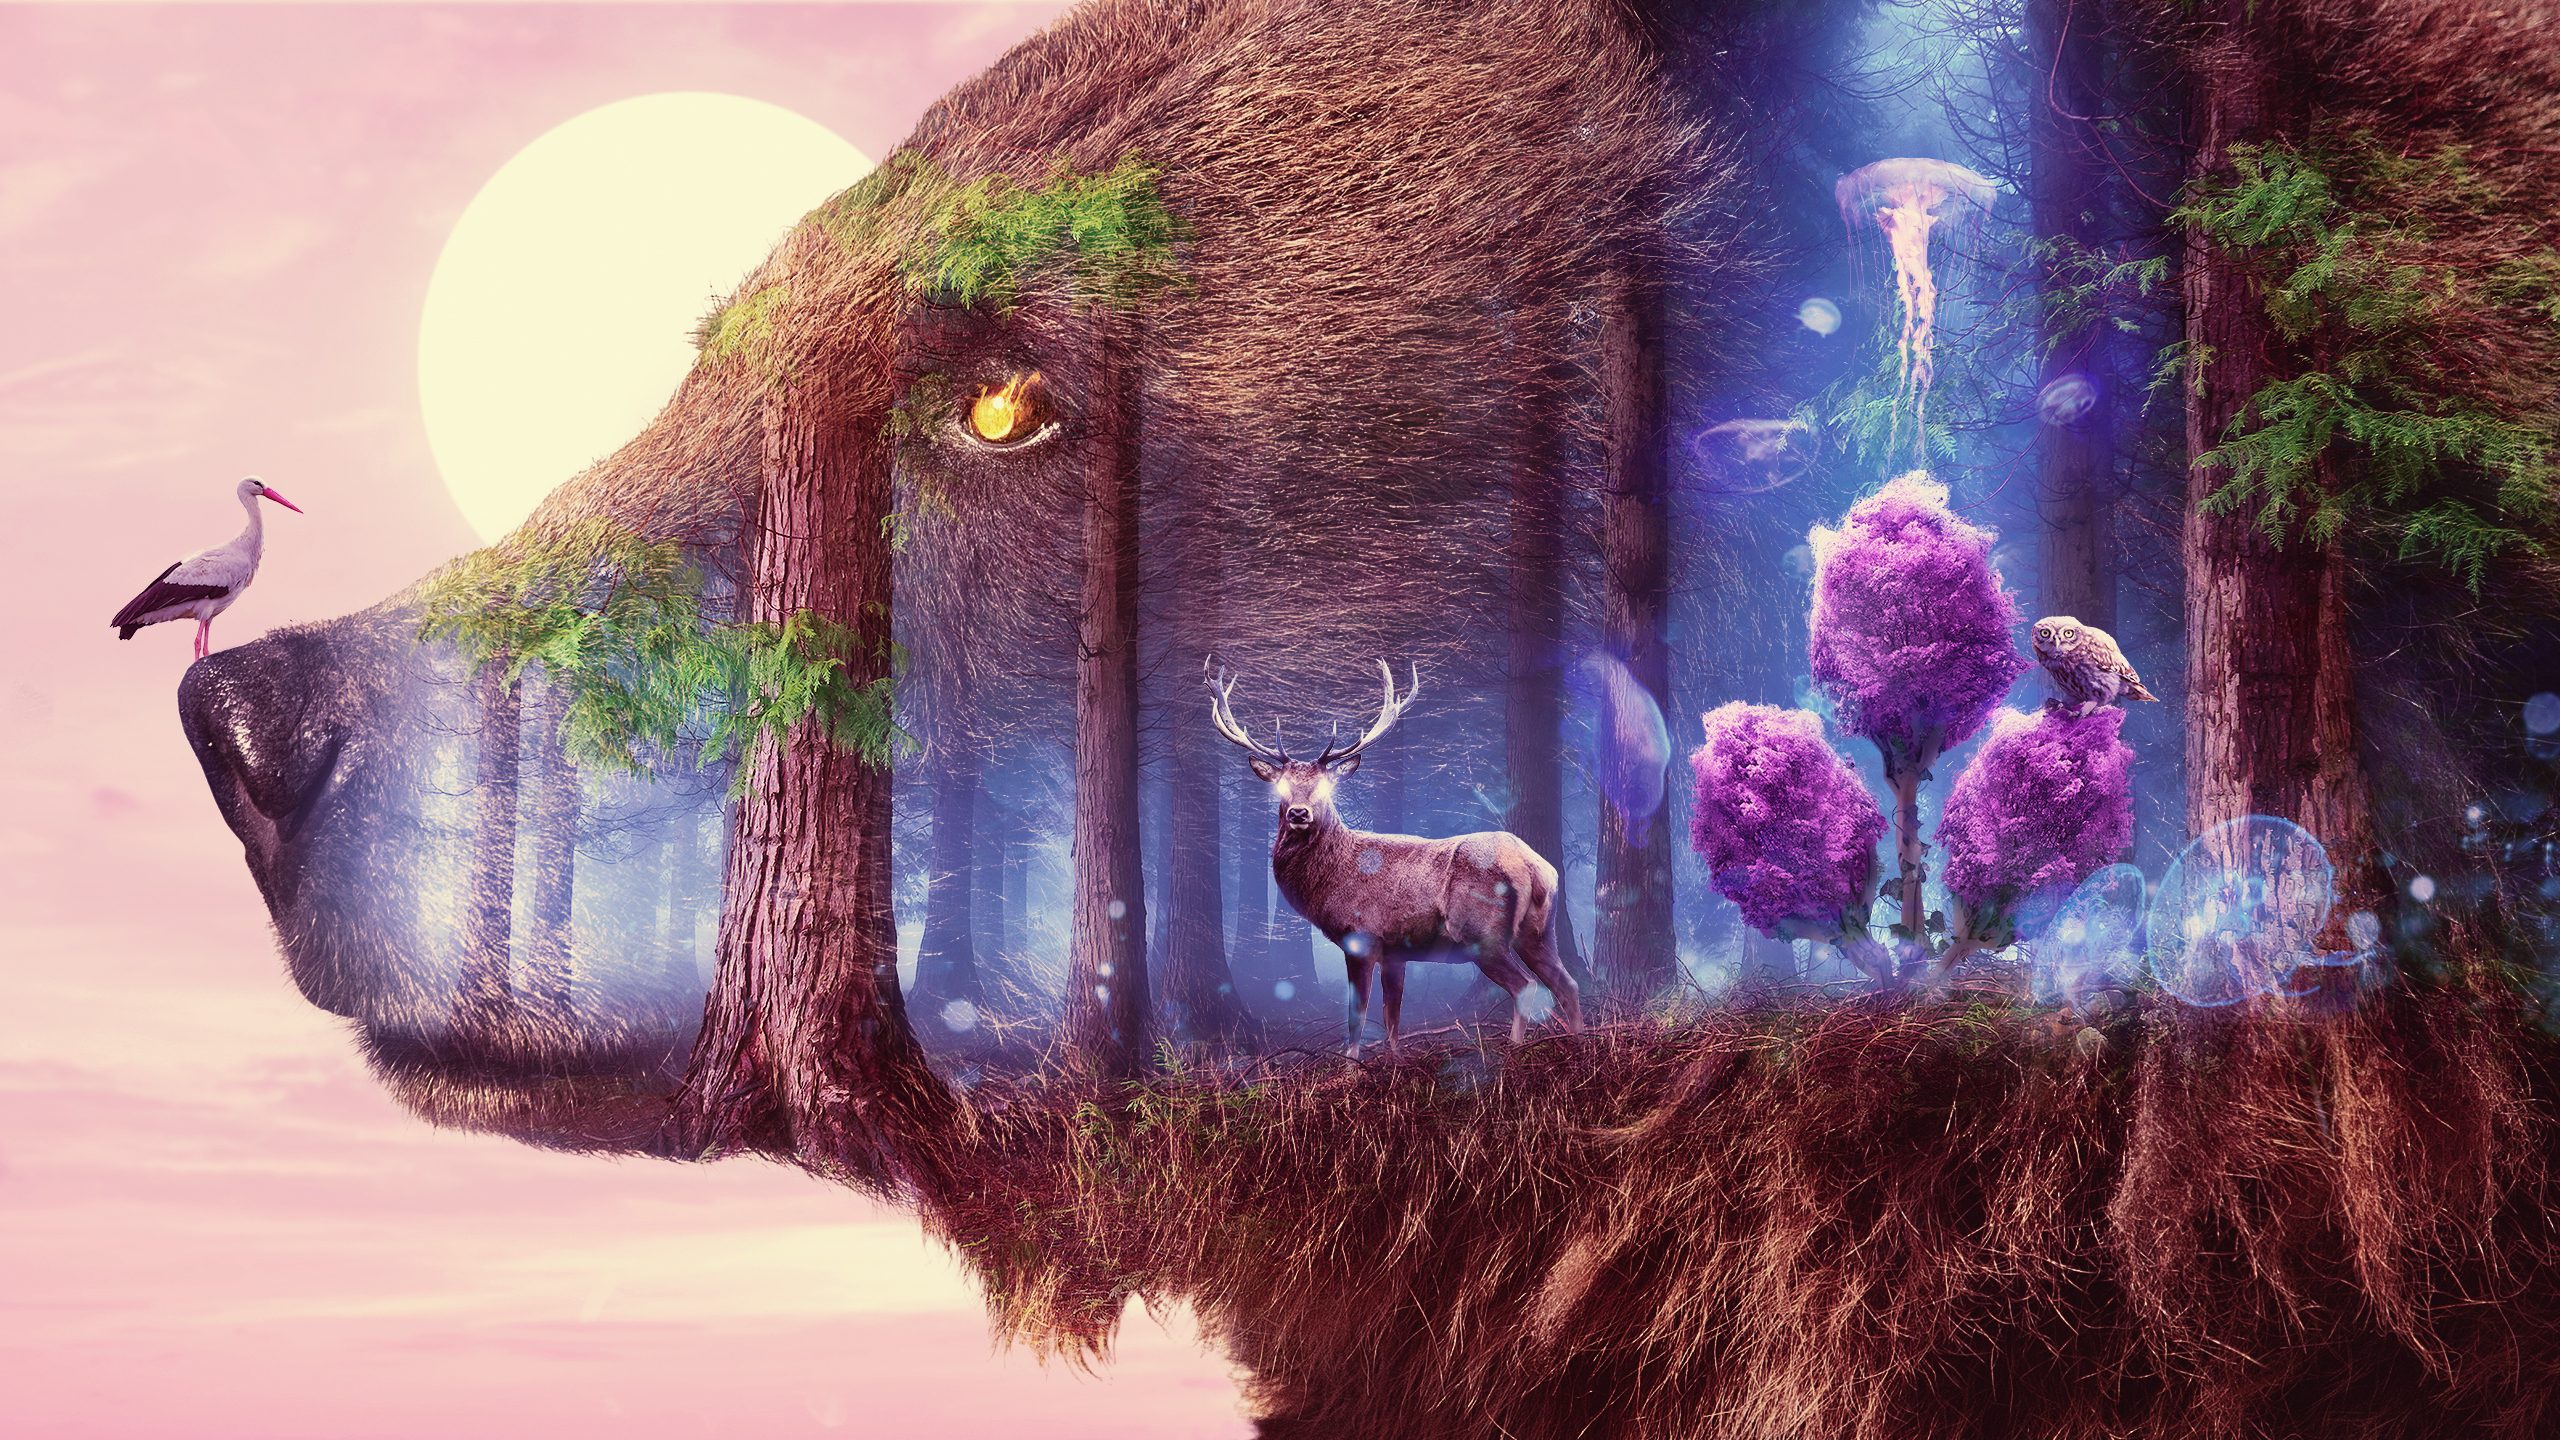 General 2560x1440 abstract grizzly bear deer forest Medusa owl stork